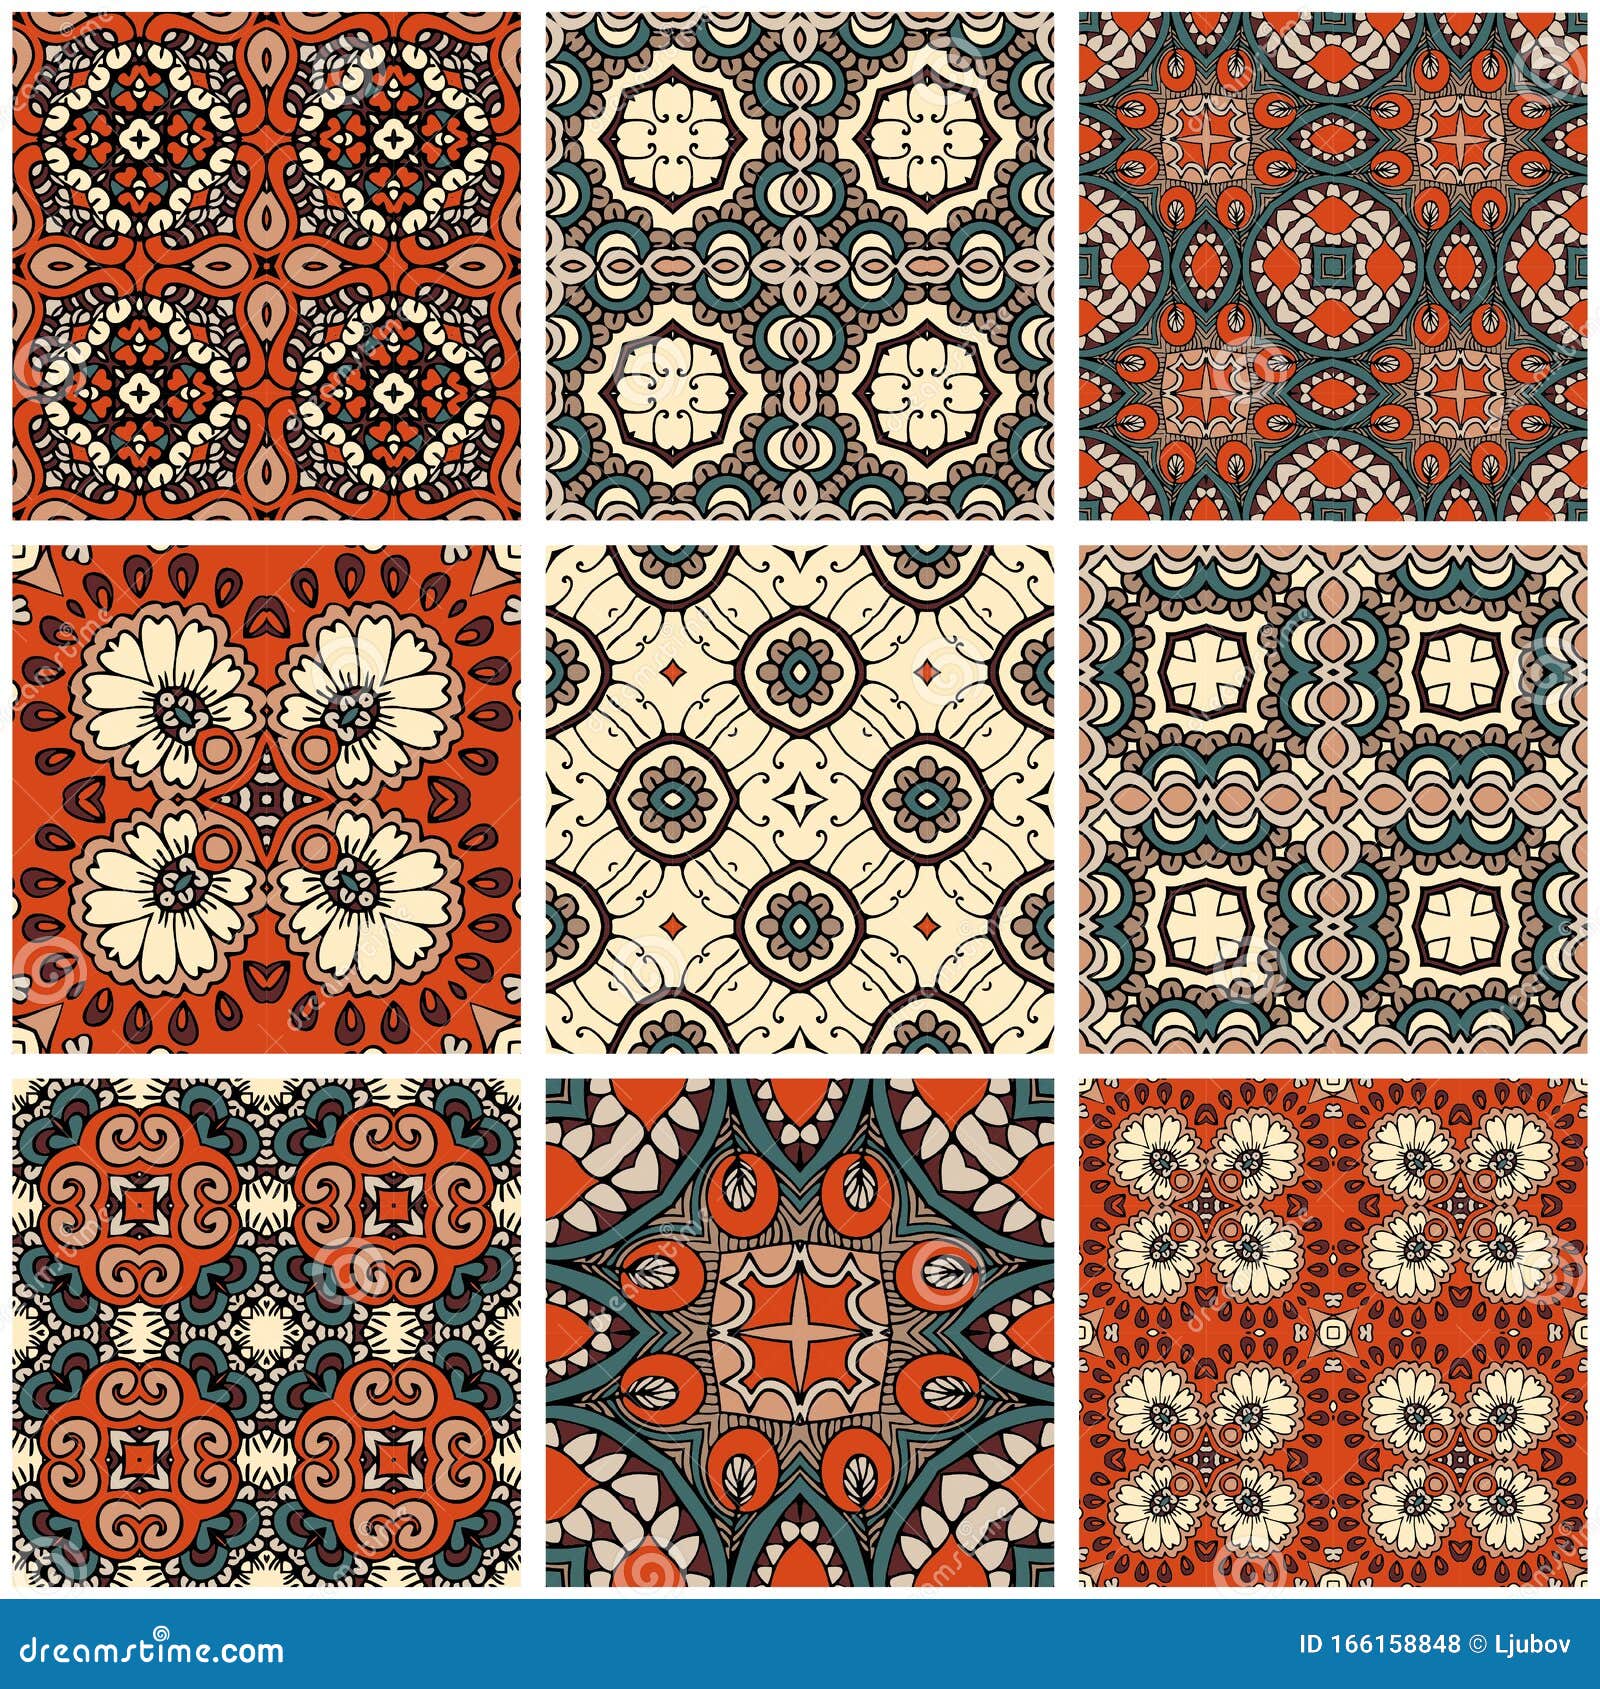 Beautiful Set with Square Ceramic Tiles. Ornamental Patterns in Ethnic ...